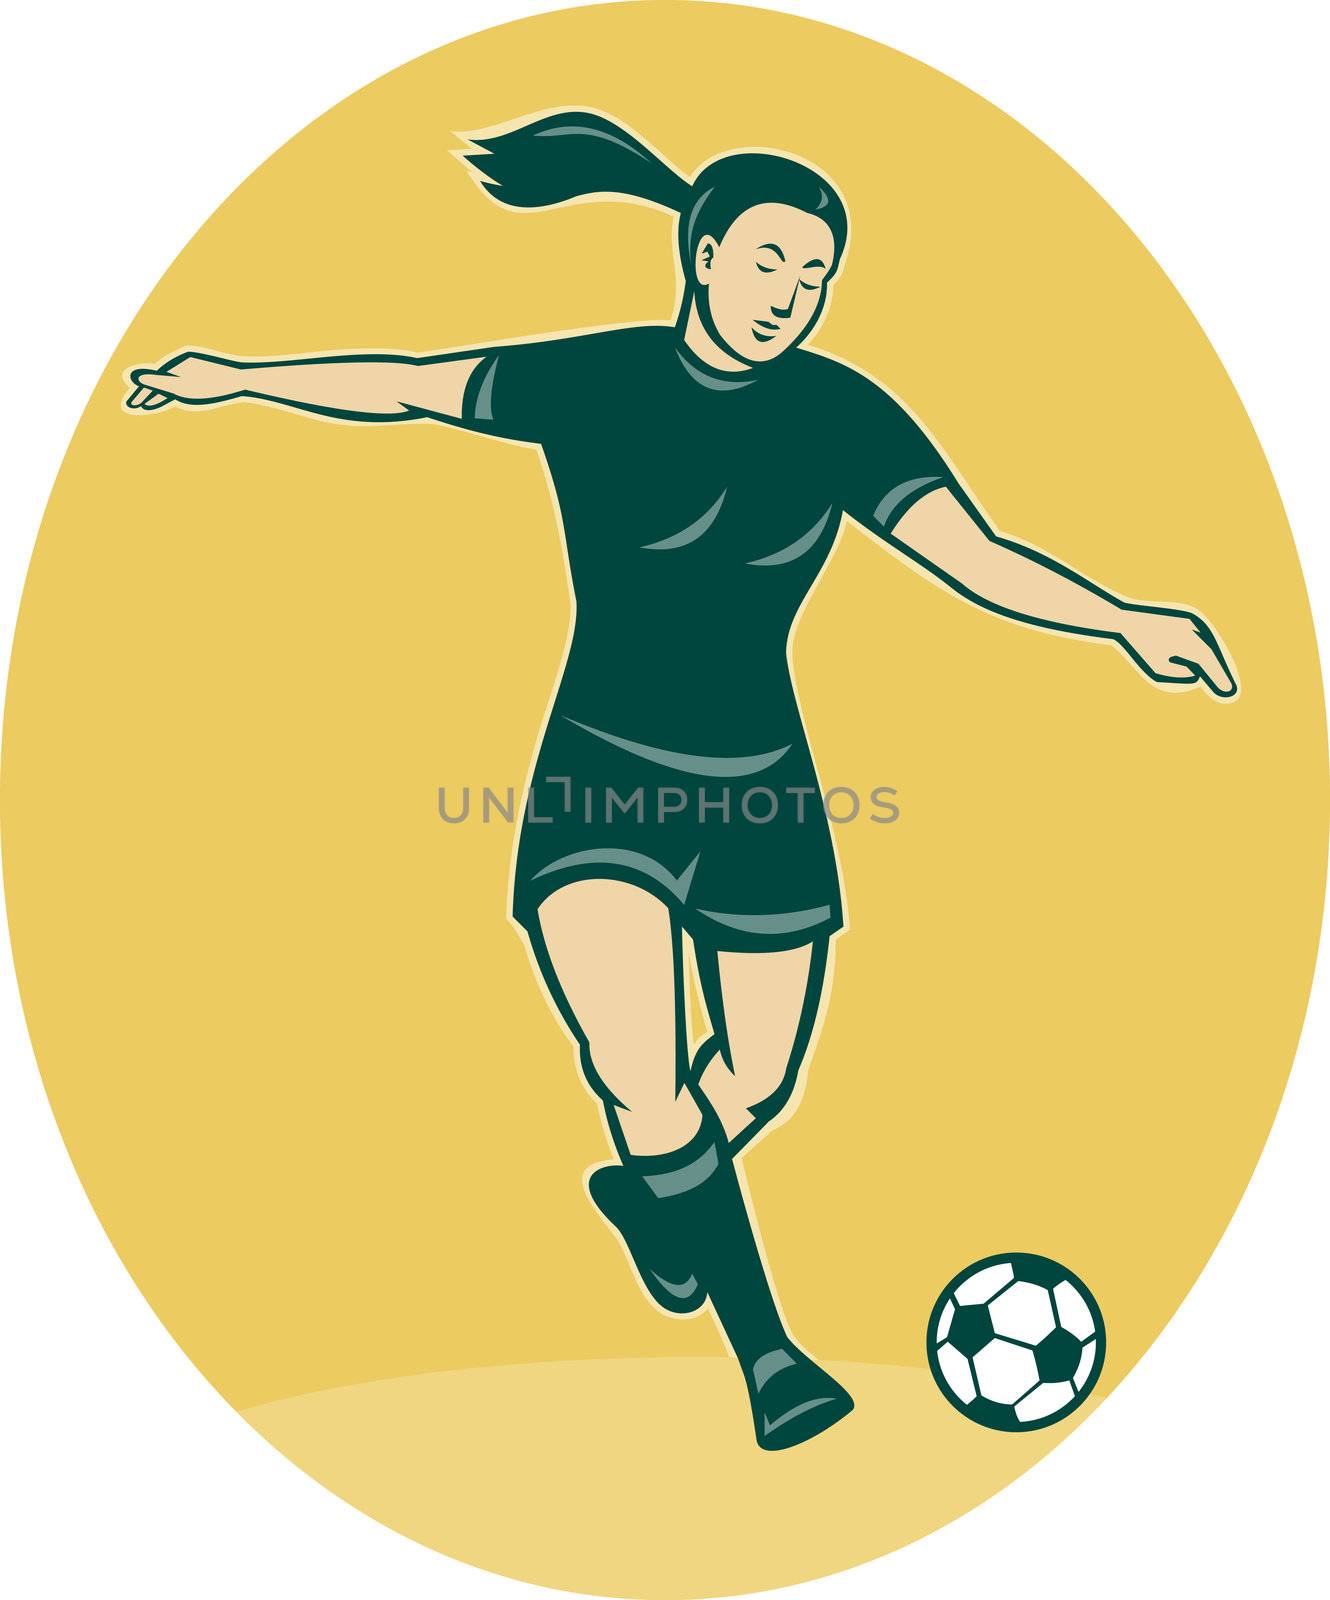 illustration of a woman girl playing soccer kicking the ball cartoon style